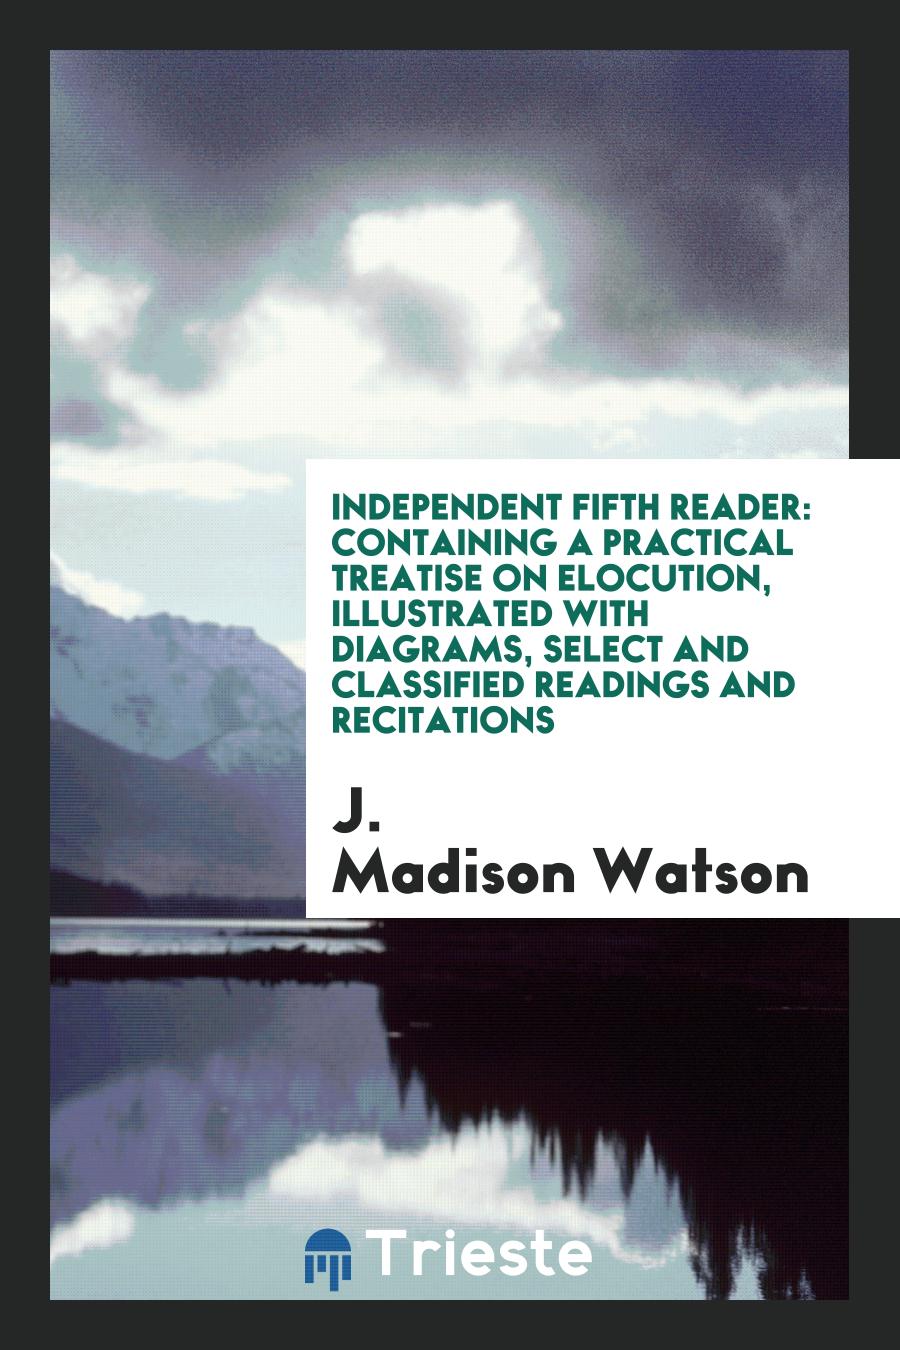 Independent Fifth Reader: Containing a Practical Treatise on Elocution, Illustrated with Diagrams, Select and Classified Readings and Recitations